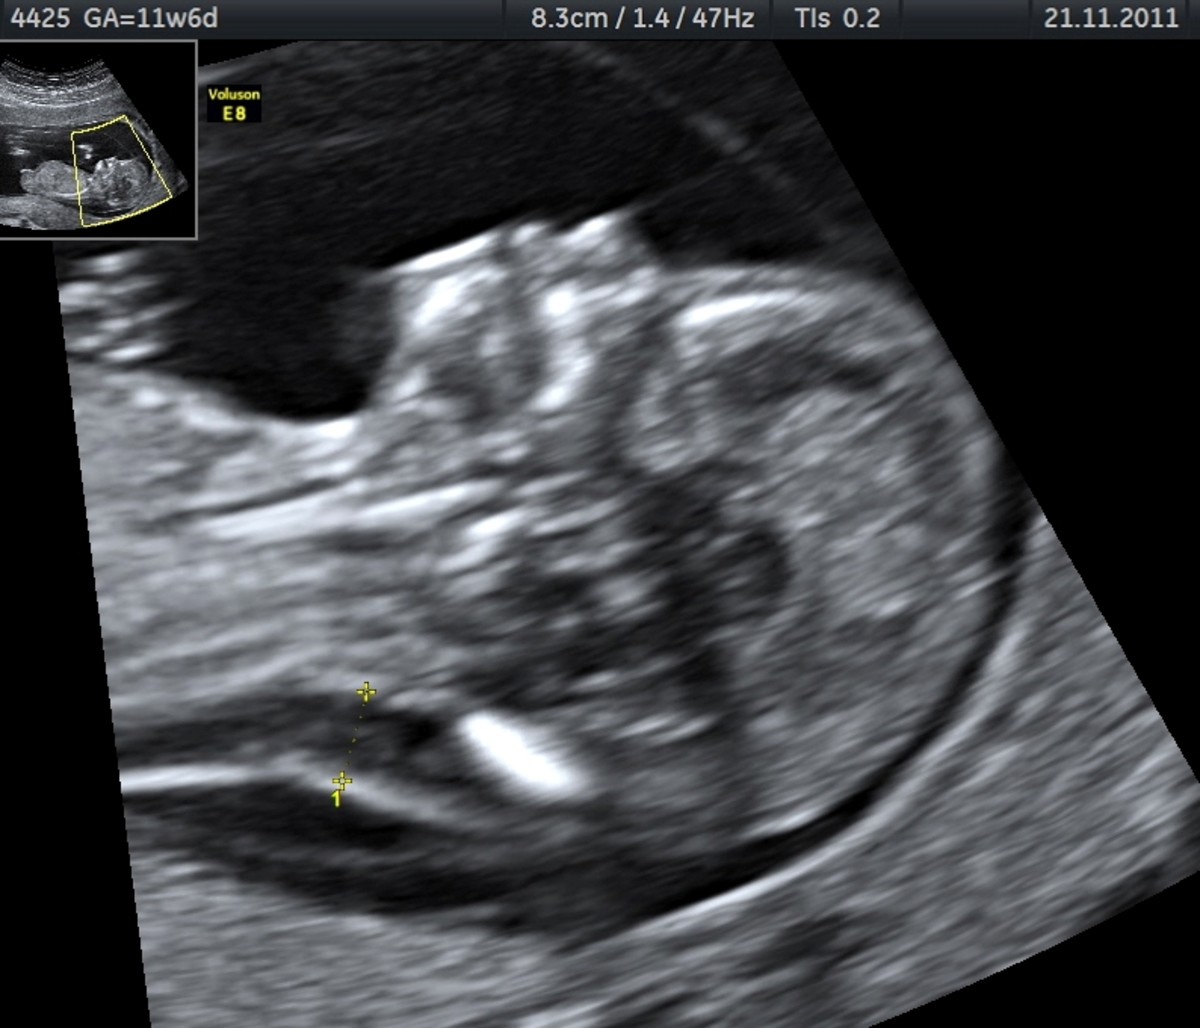 Edema in the nuchal fold and an absence of a nasal bone are observed in this NT ultrasound at 11 weeks of gestation. This baby has Trisomy 21 (Down Syndrome), as confirmed by Chorionic Villus Sampling testing. 